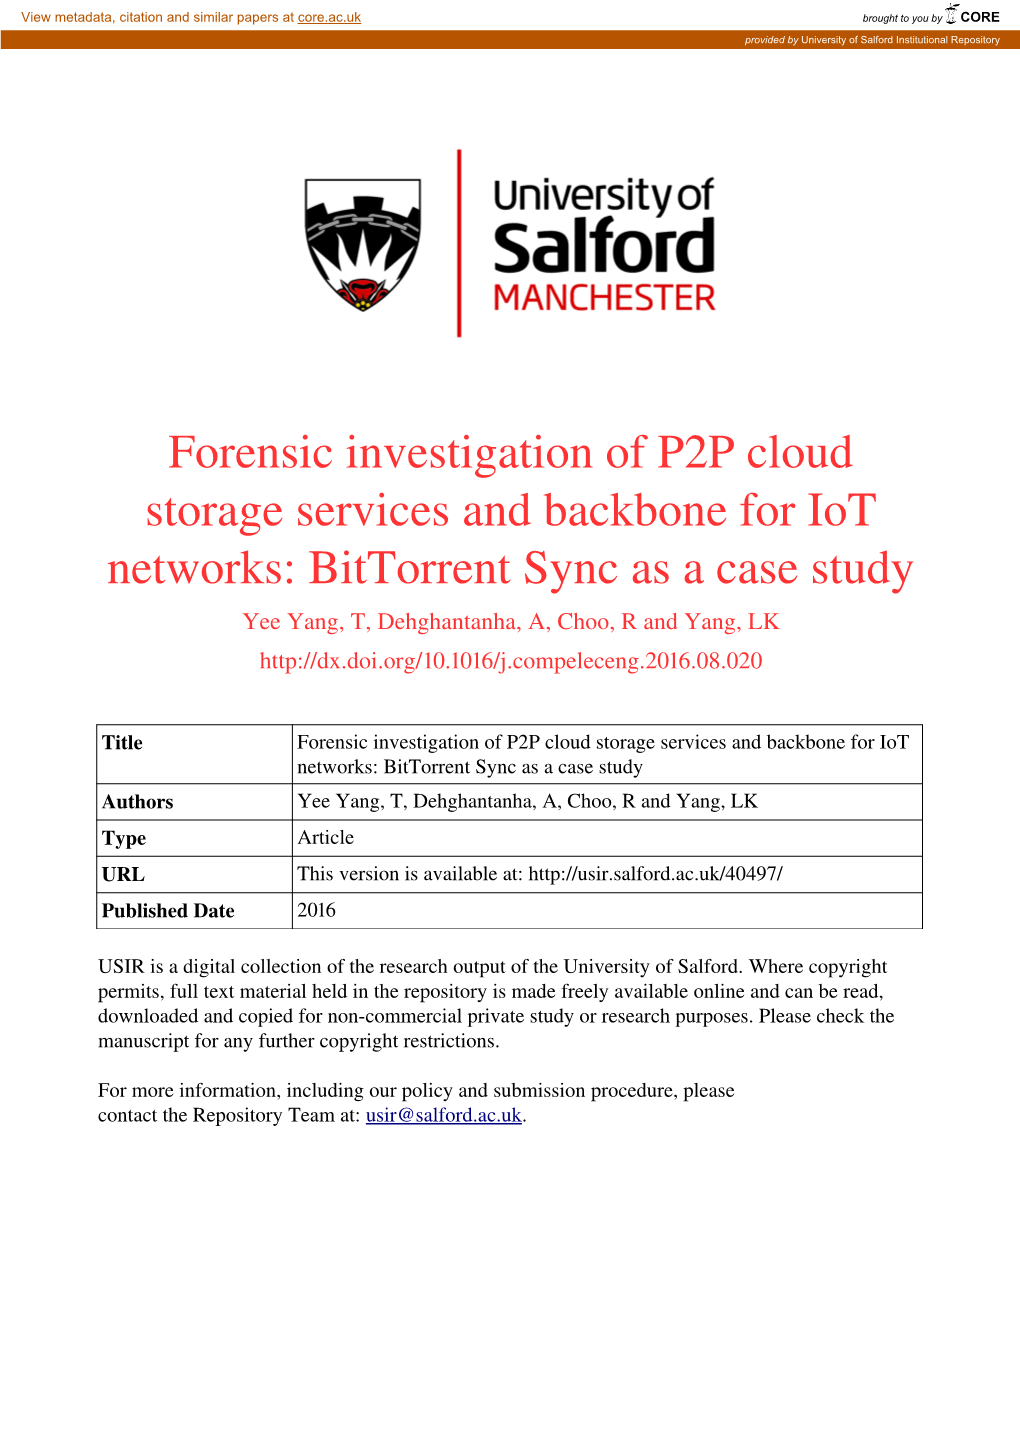 Forensic Investigation of P2P Cloud Storage Services and Backbone For